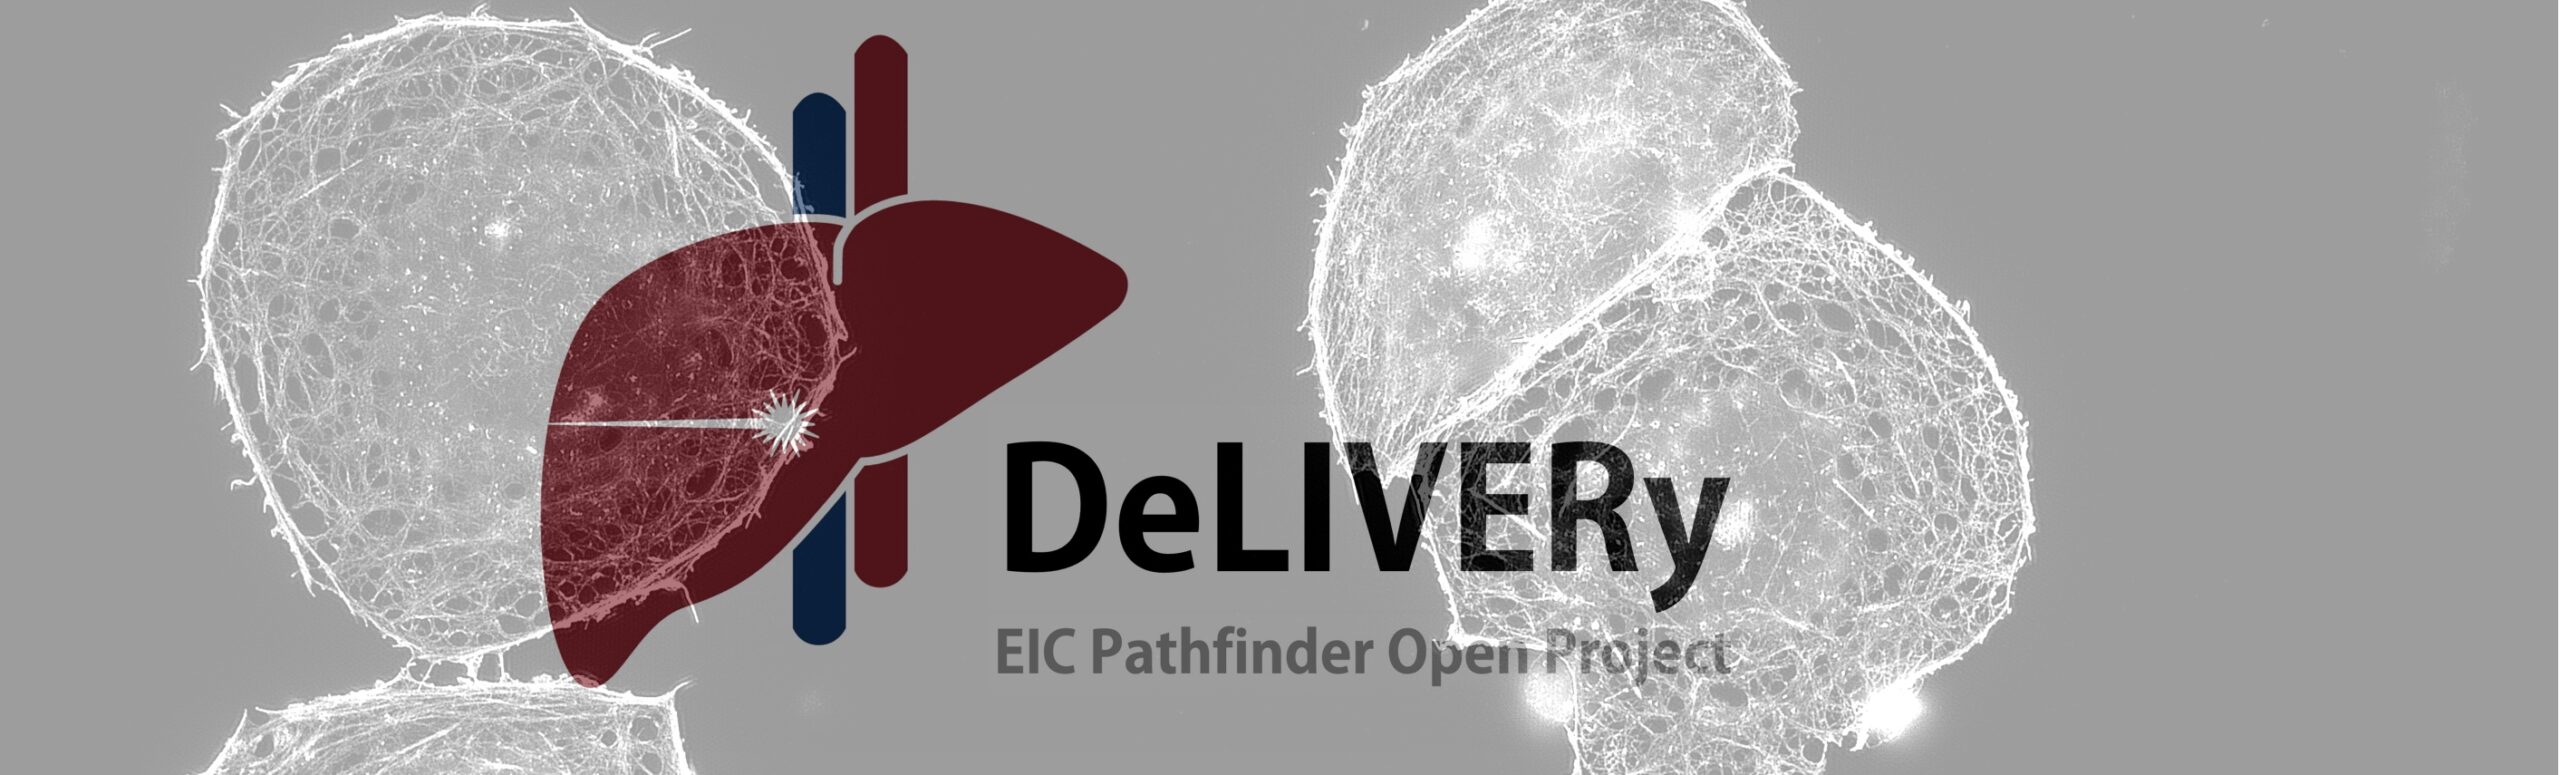 EIC Pathfinder Open Project DeLIVERy